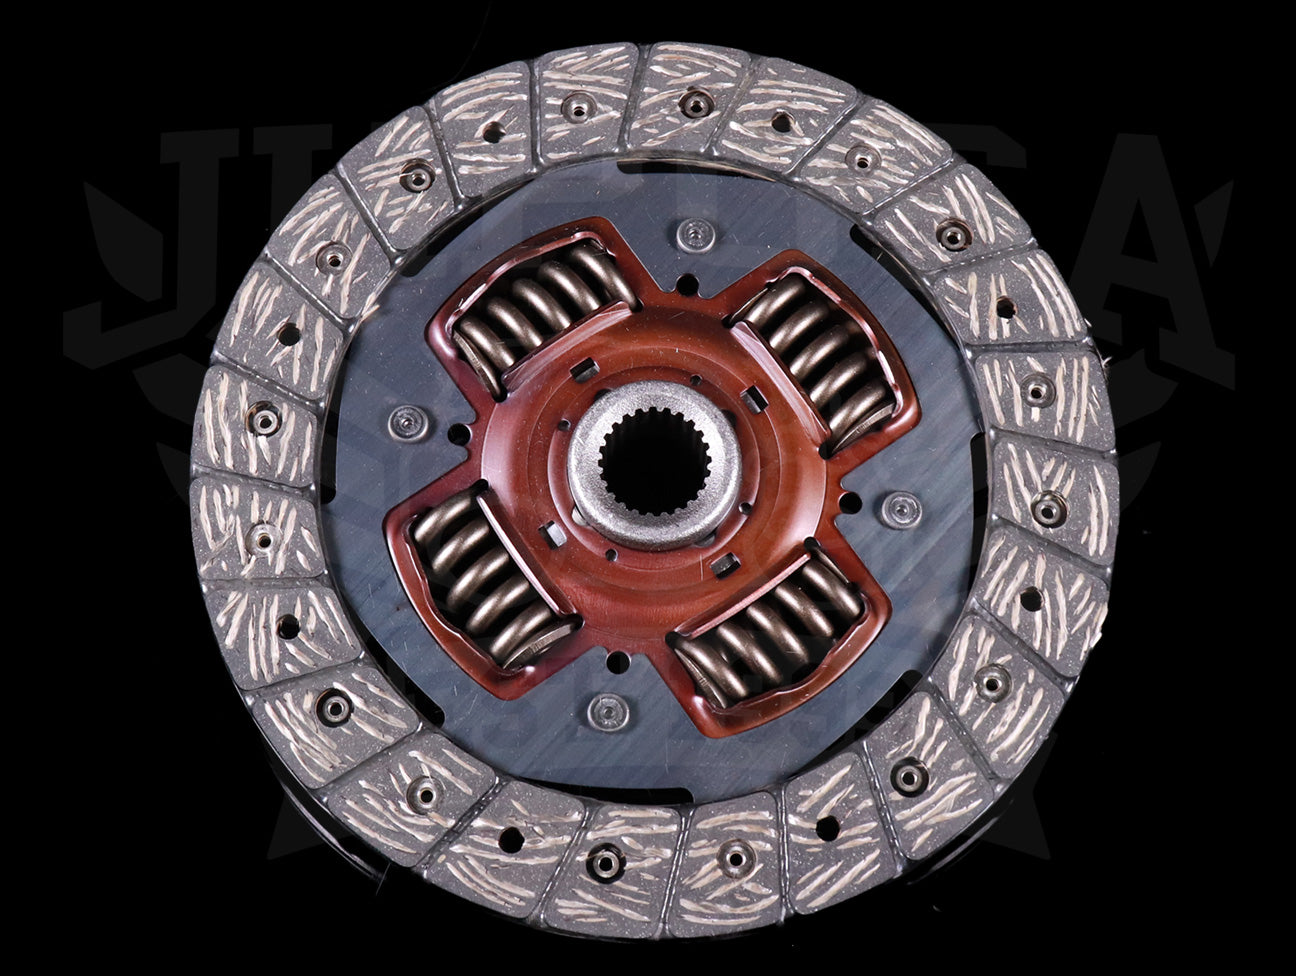 Exedy Stage 1 Organic Clutch Kit - 90-91 Integra (Cable Trans)